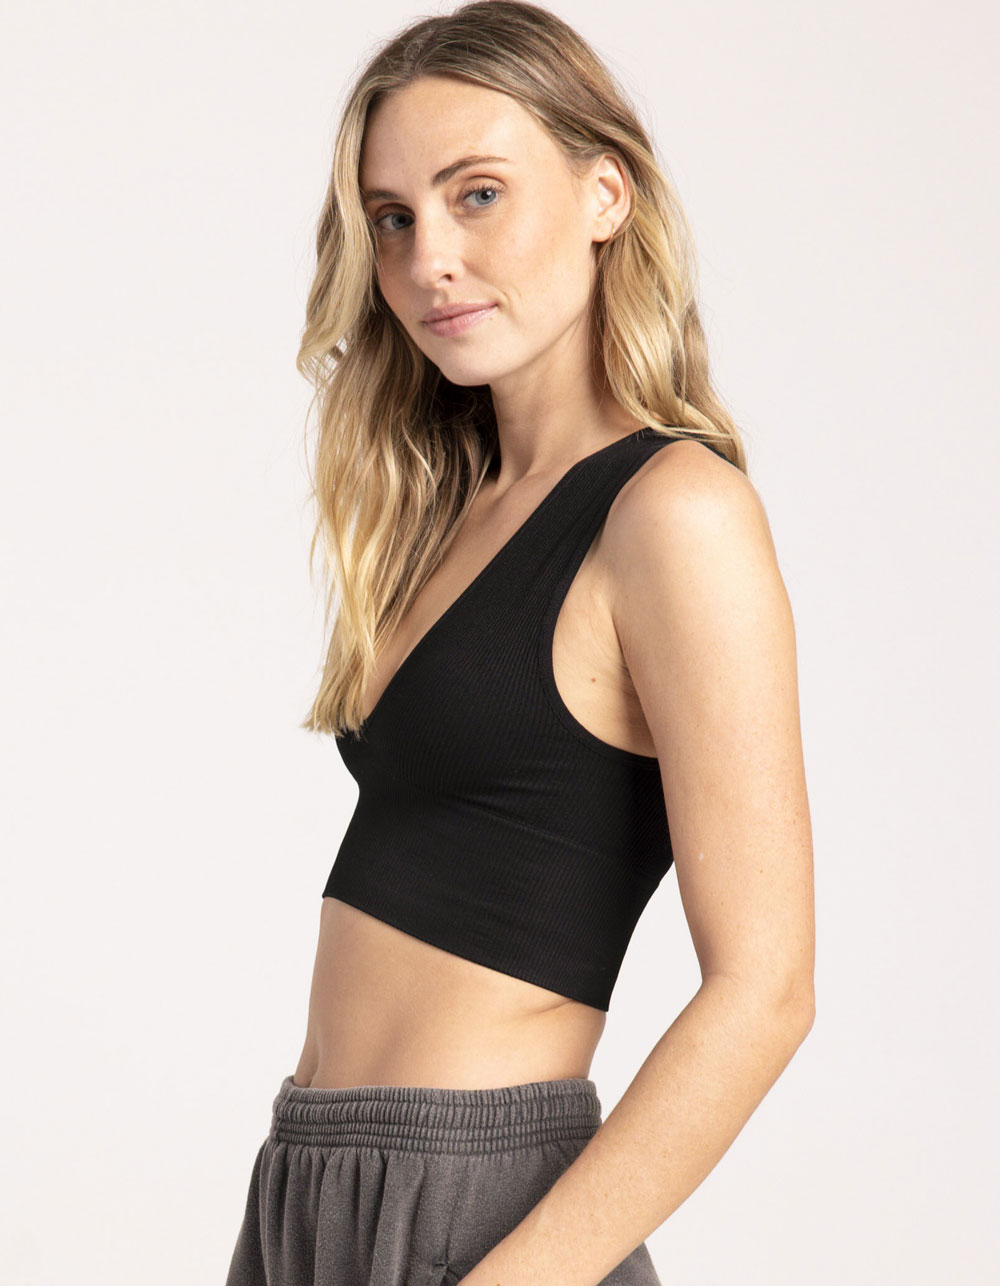 Removable Padding Crop Bras Perfect for Yoga, Pilates, and Daily